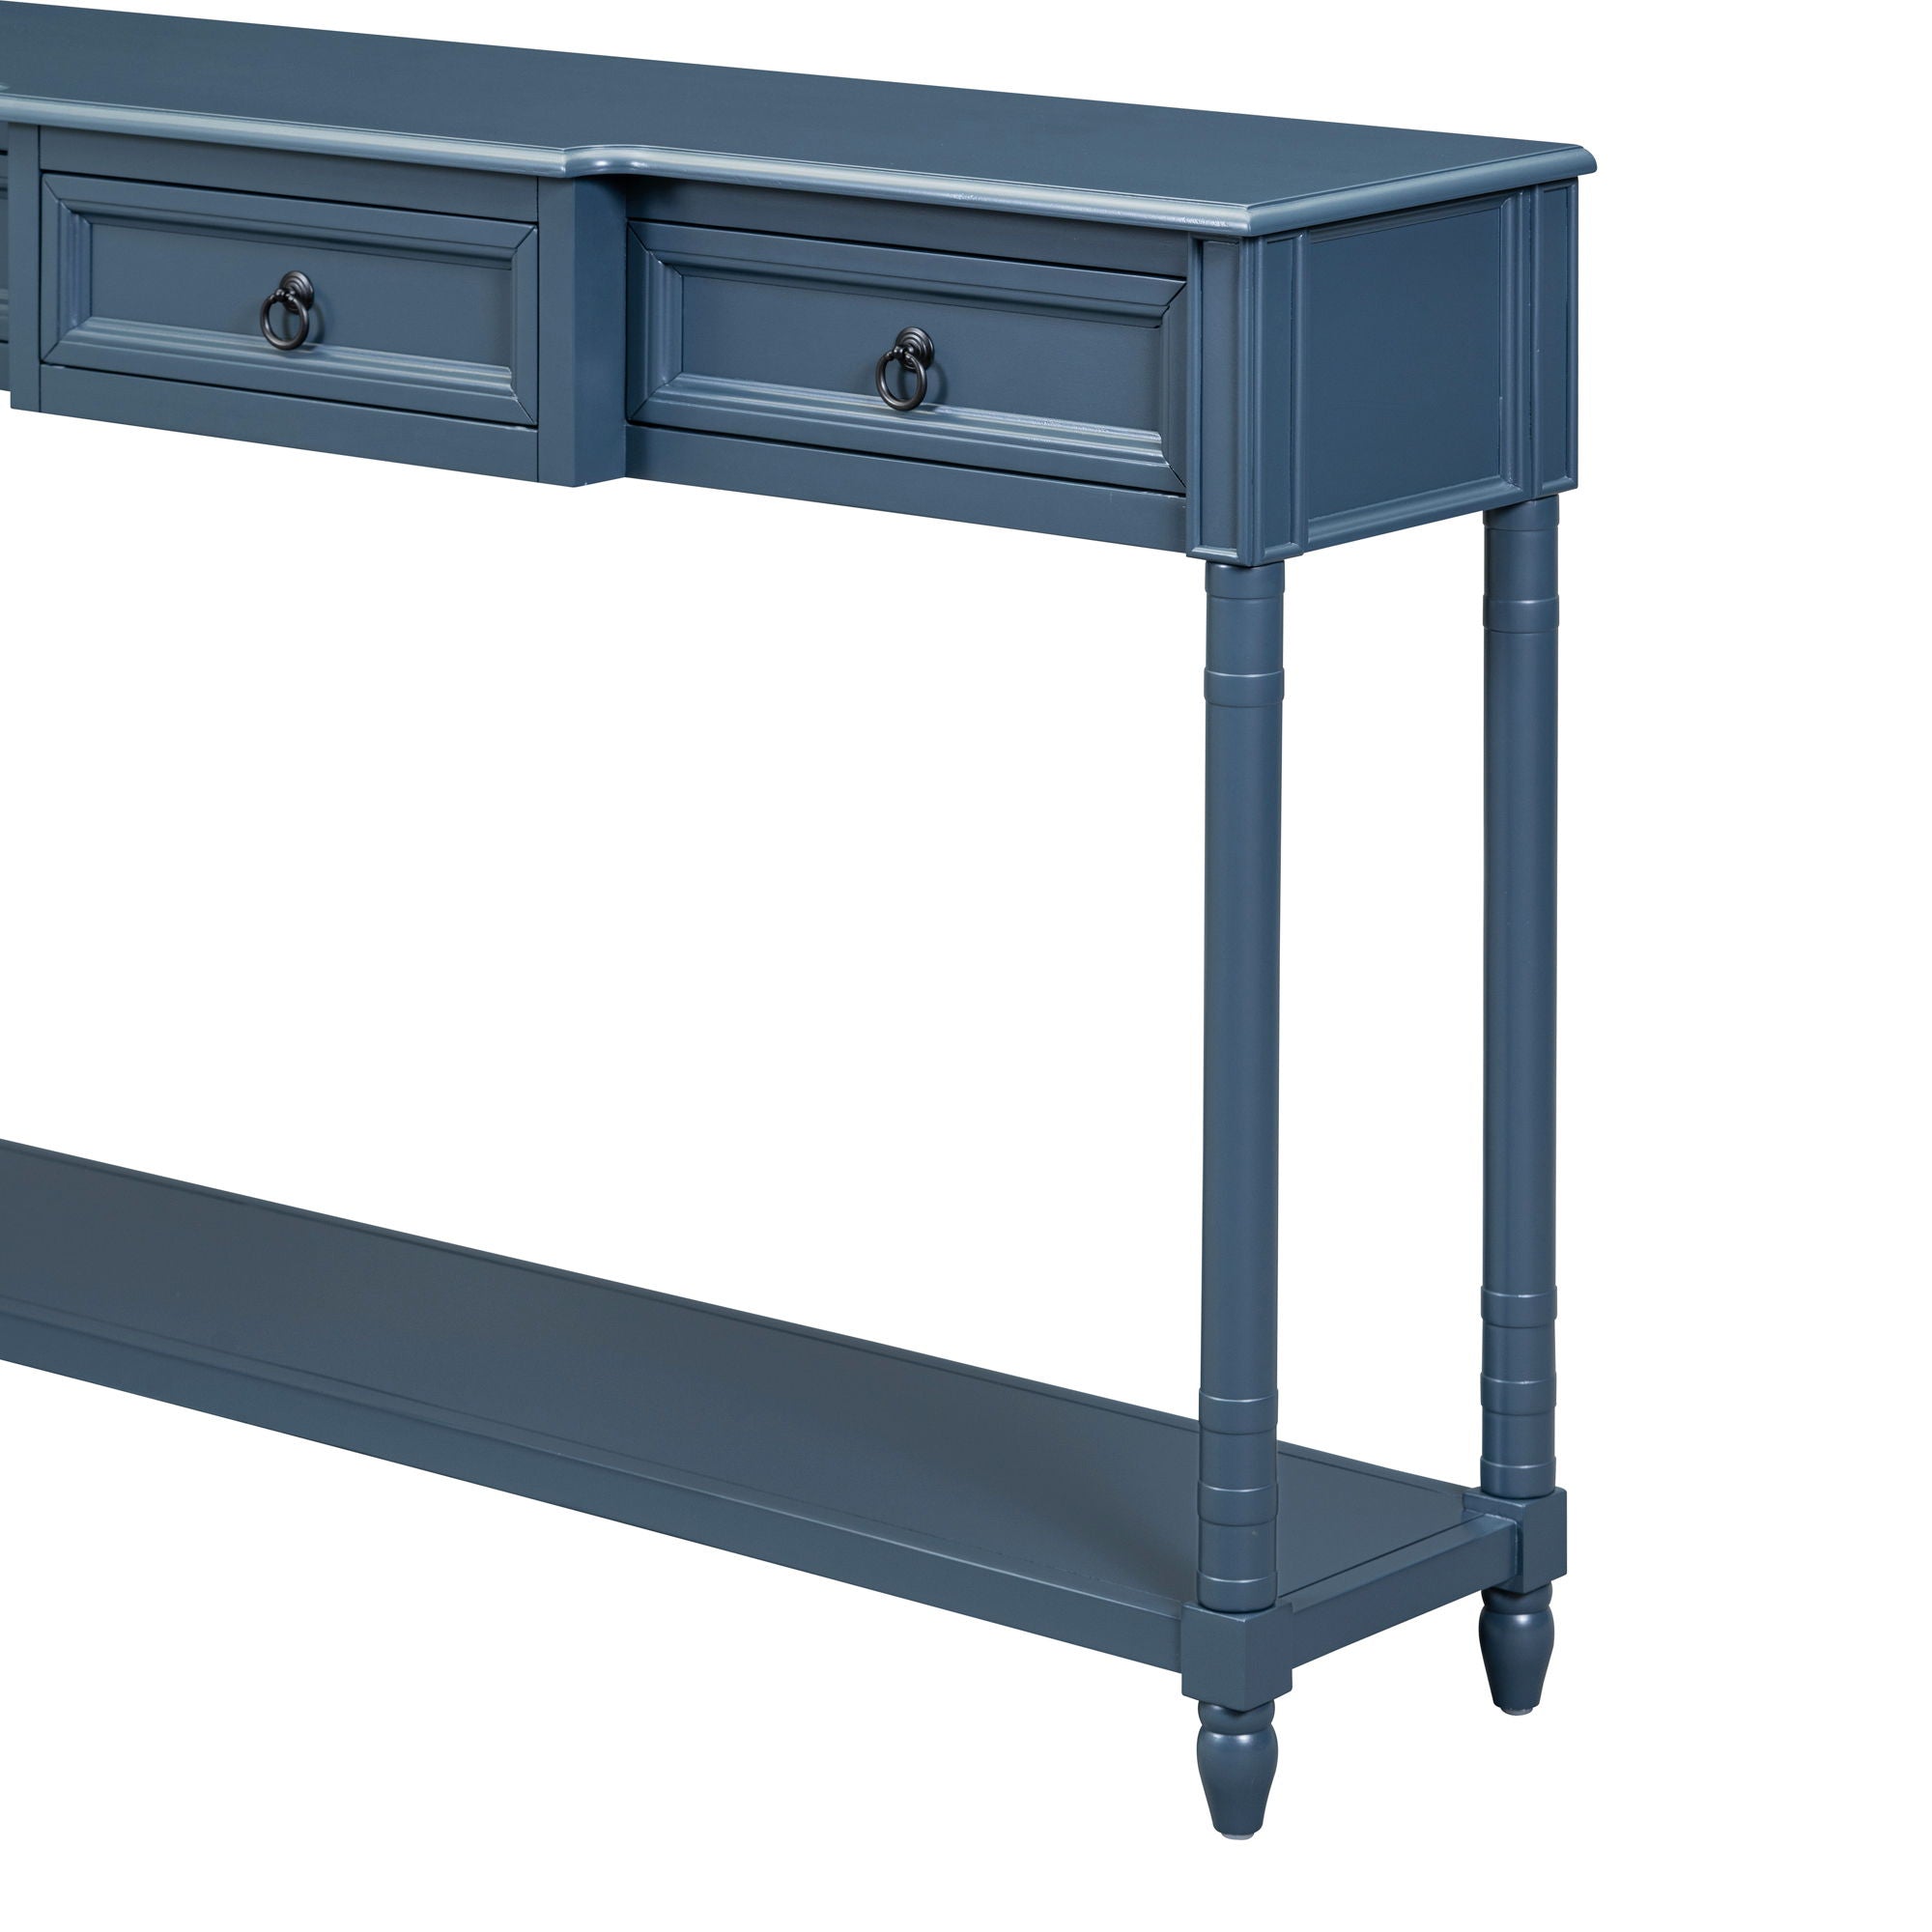 Trexm Console Table Sofa Table With Drawers For Entryway With Projecting Drawers And Long Shelf - Antique Navy